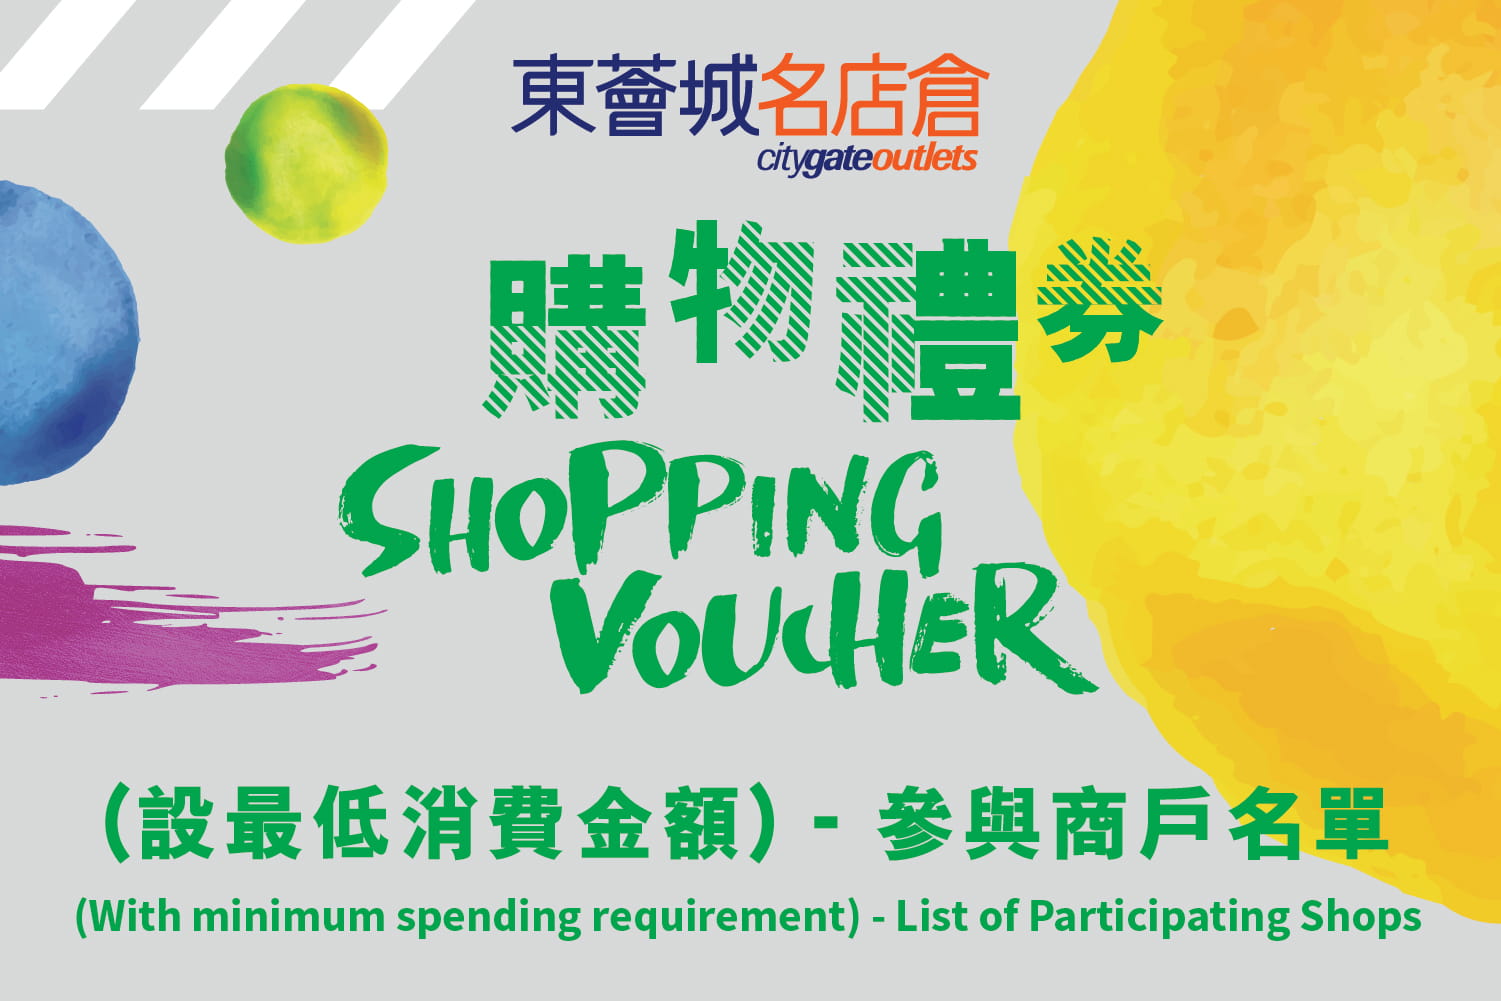 Citygate Outlets Shopping Voucher (With minimum spending requirement) – List of Participating Shops